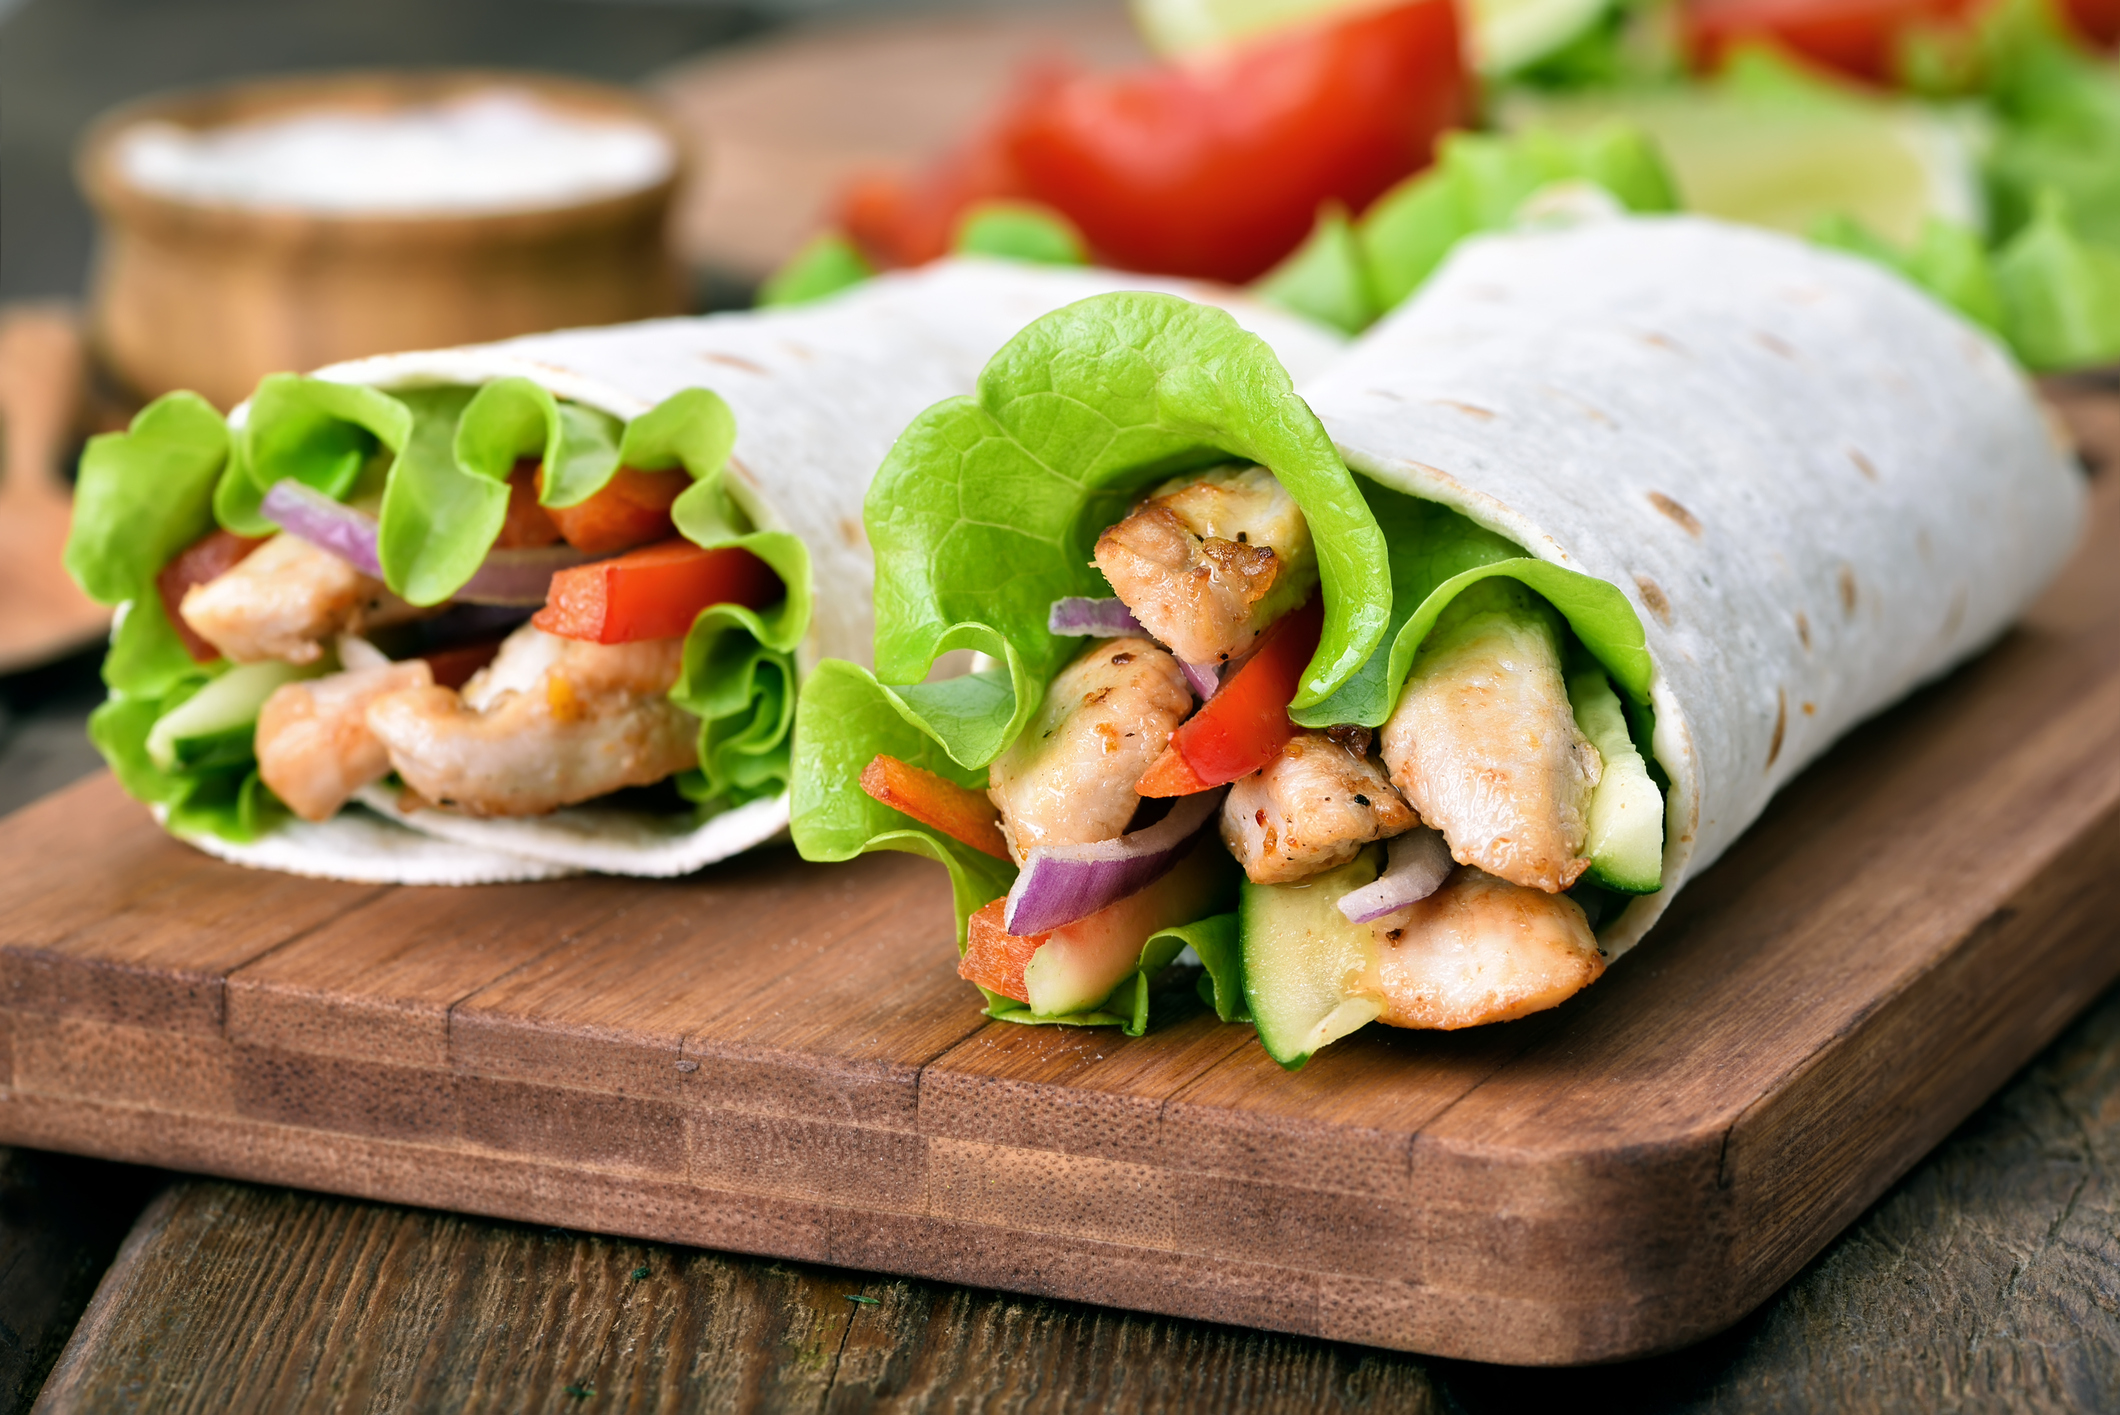 Tortilla Wraps can be easy to mistake for healthy. 